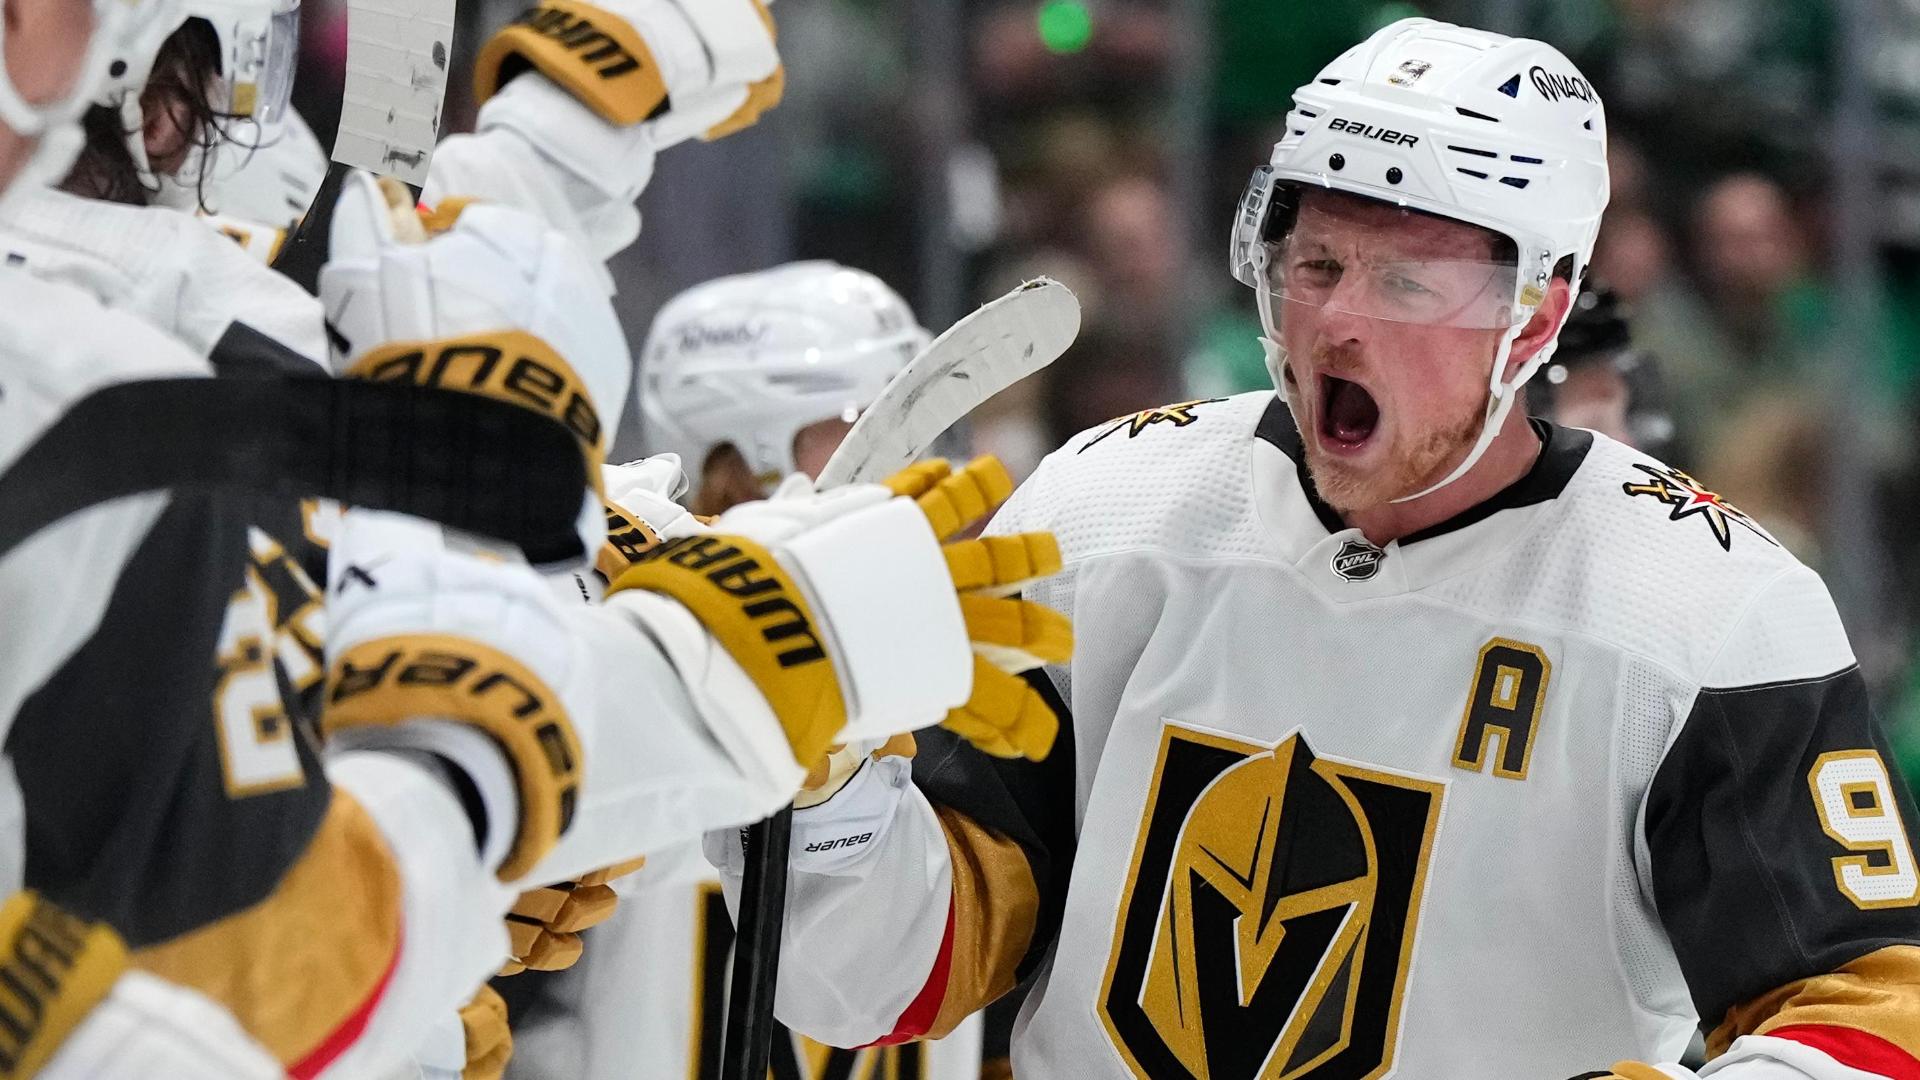 Jack Eichel scores on the empty net to secure Knights win